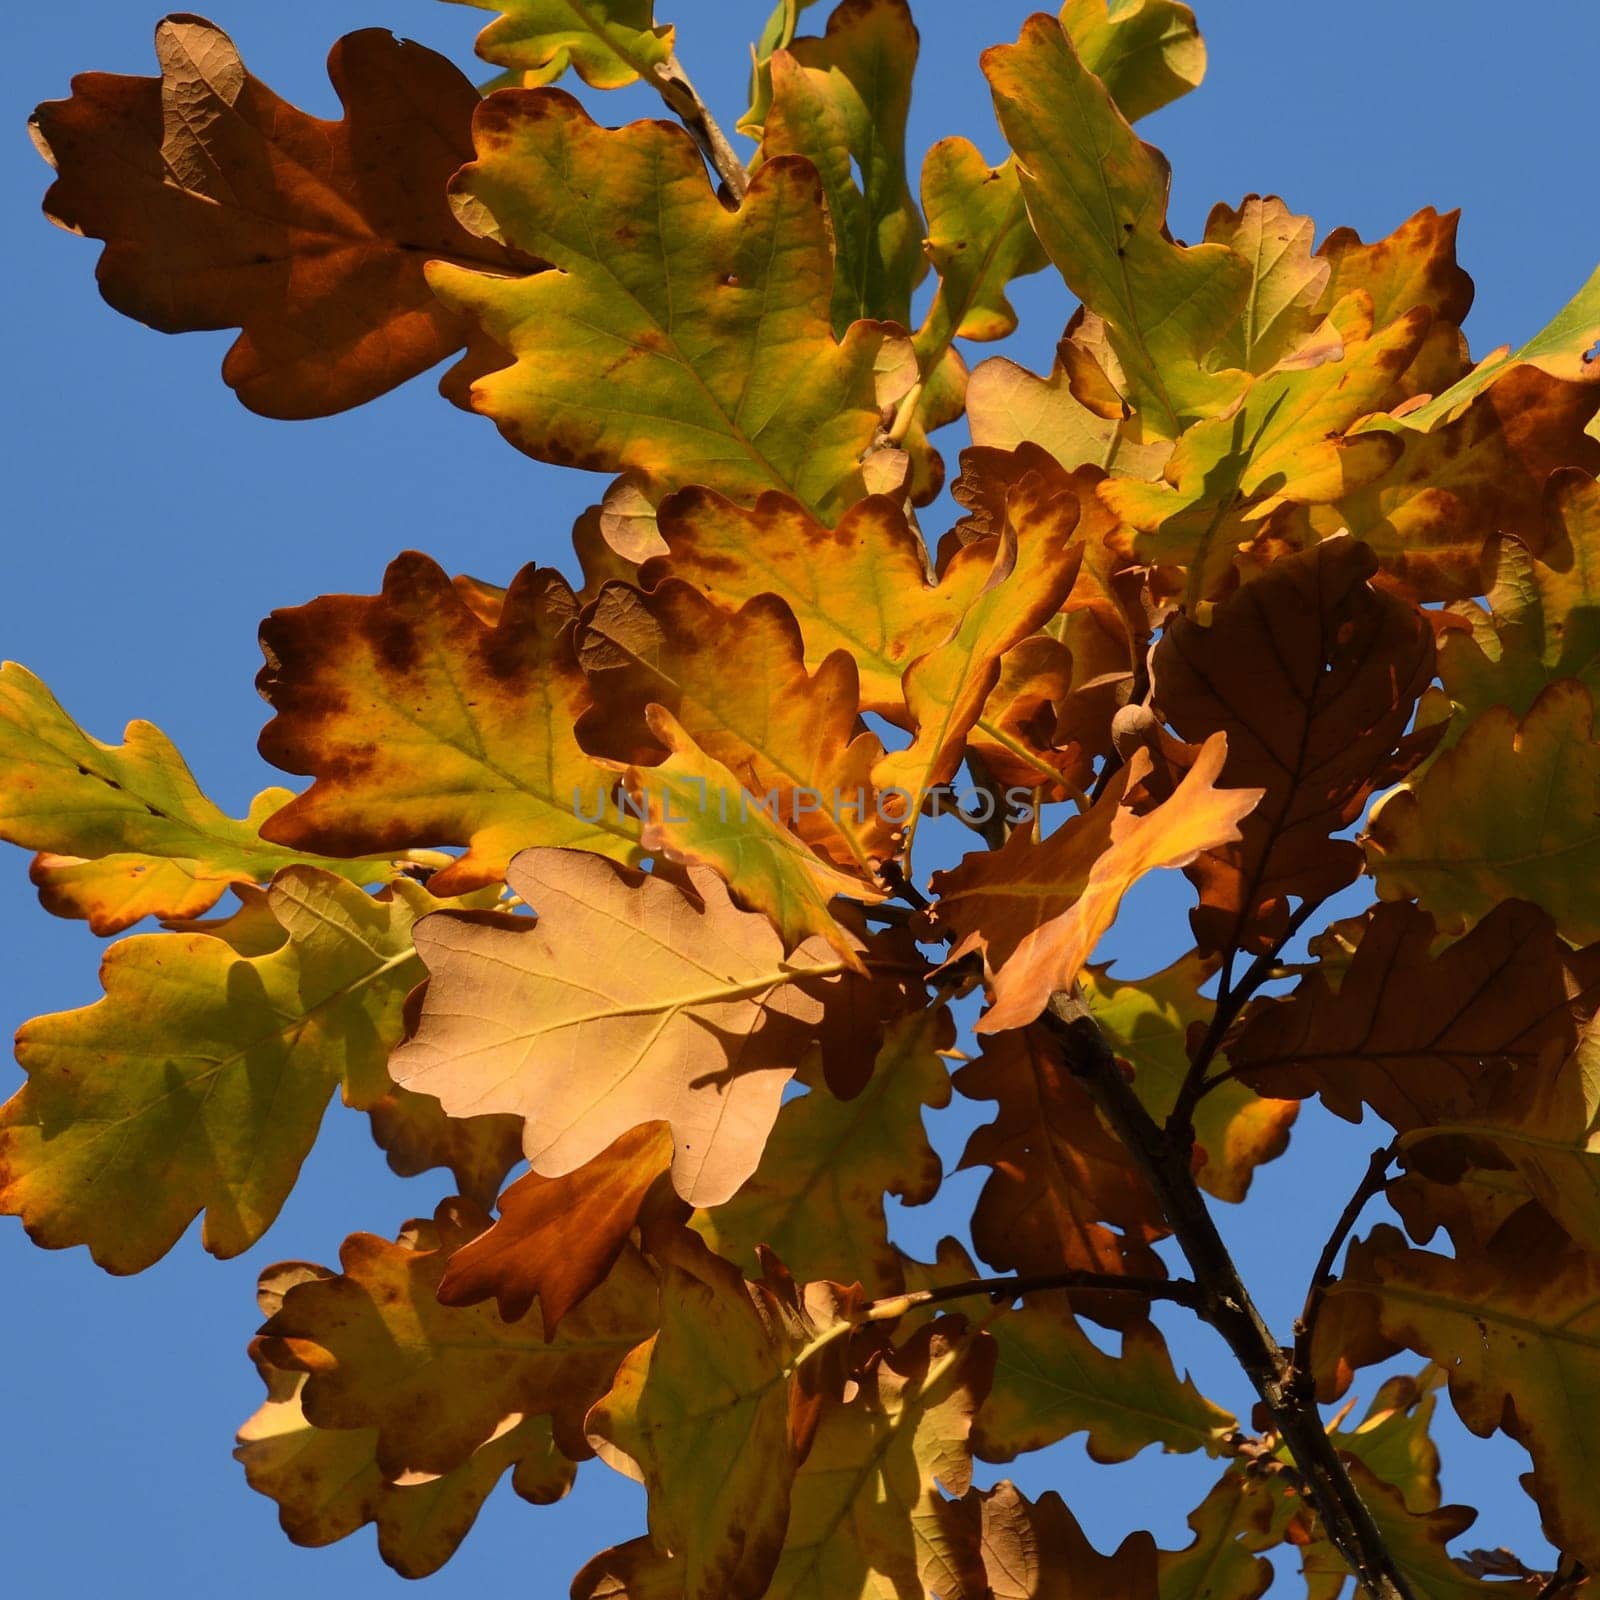 Yellow oak leaves on a tree branch in autumn by olgavolodina